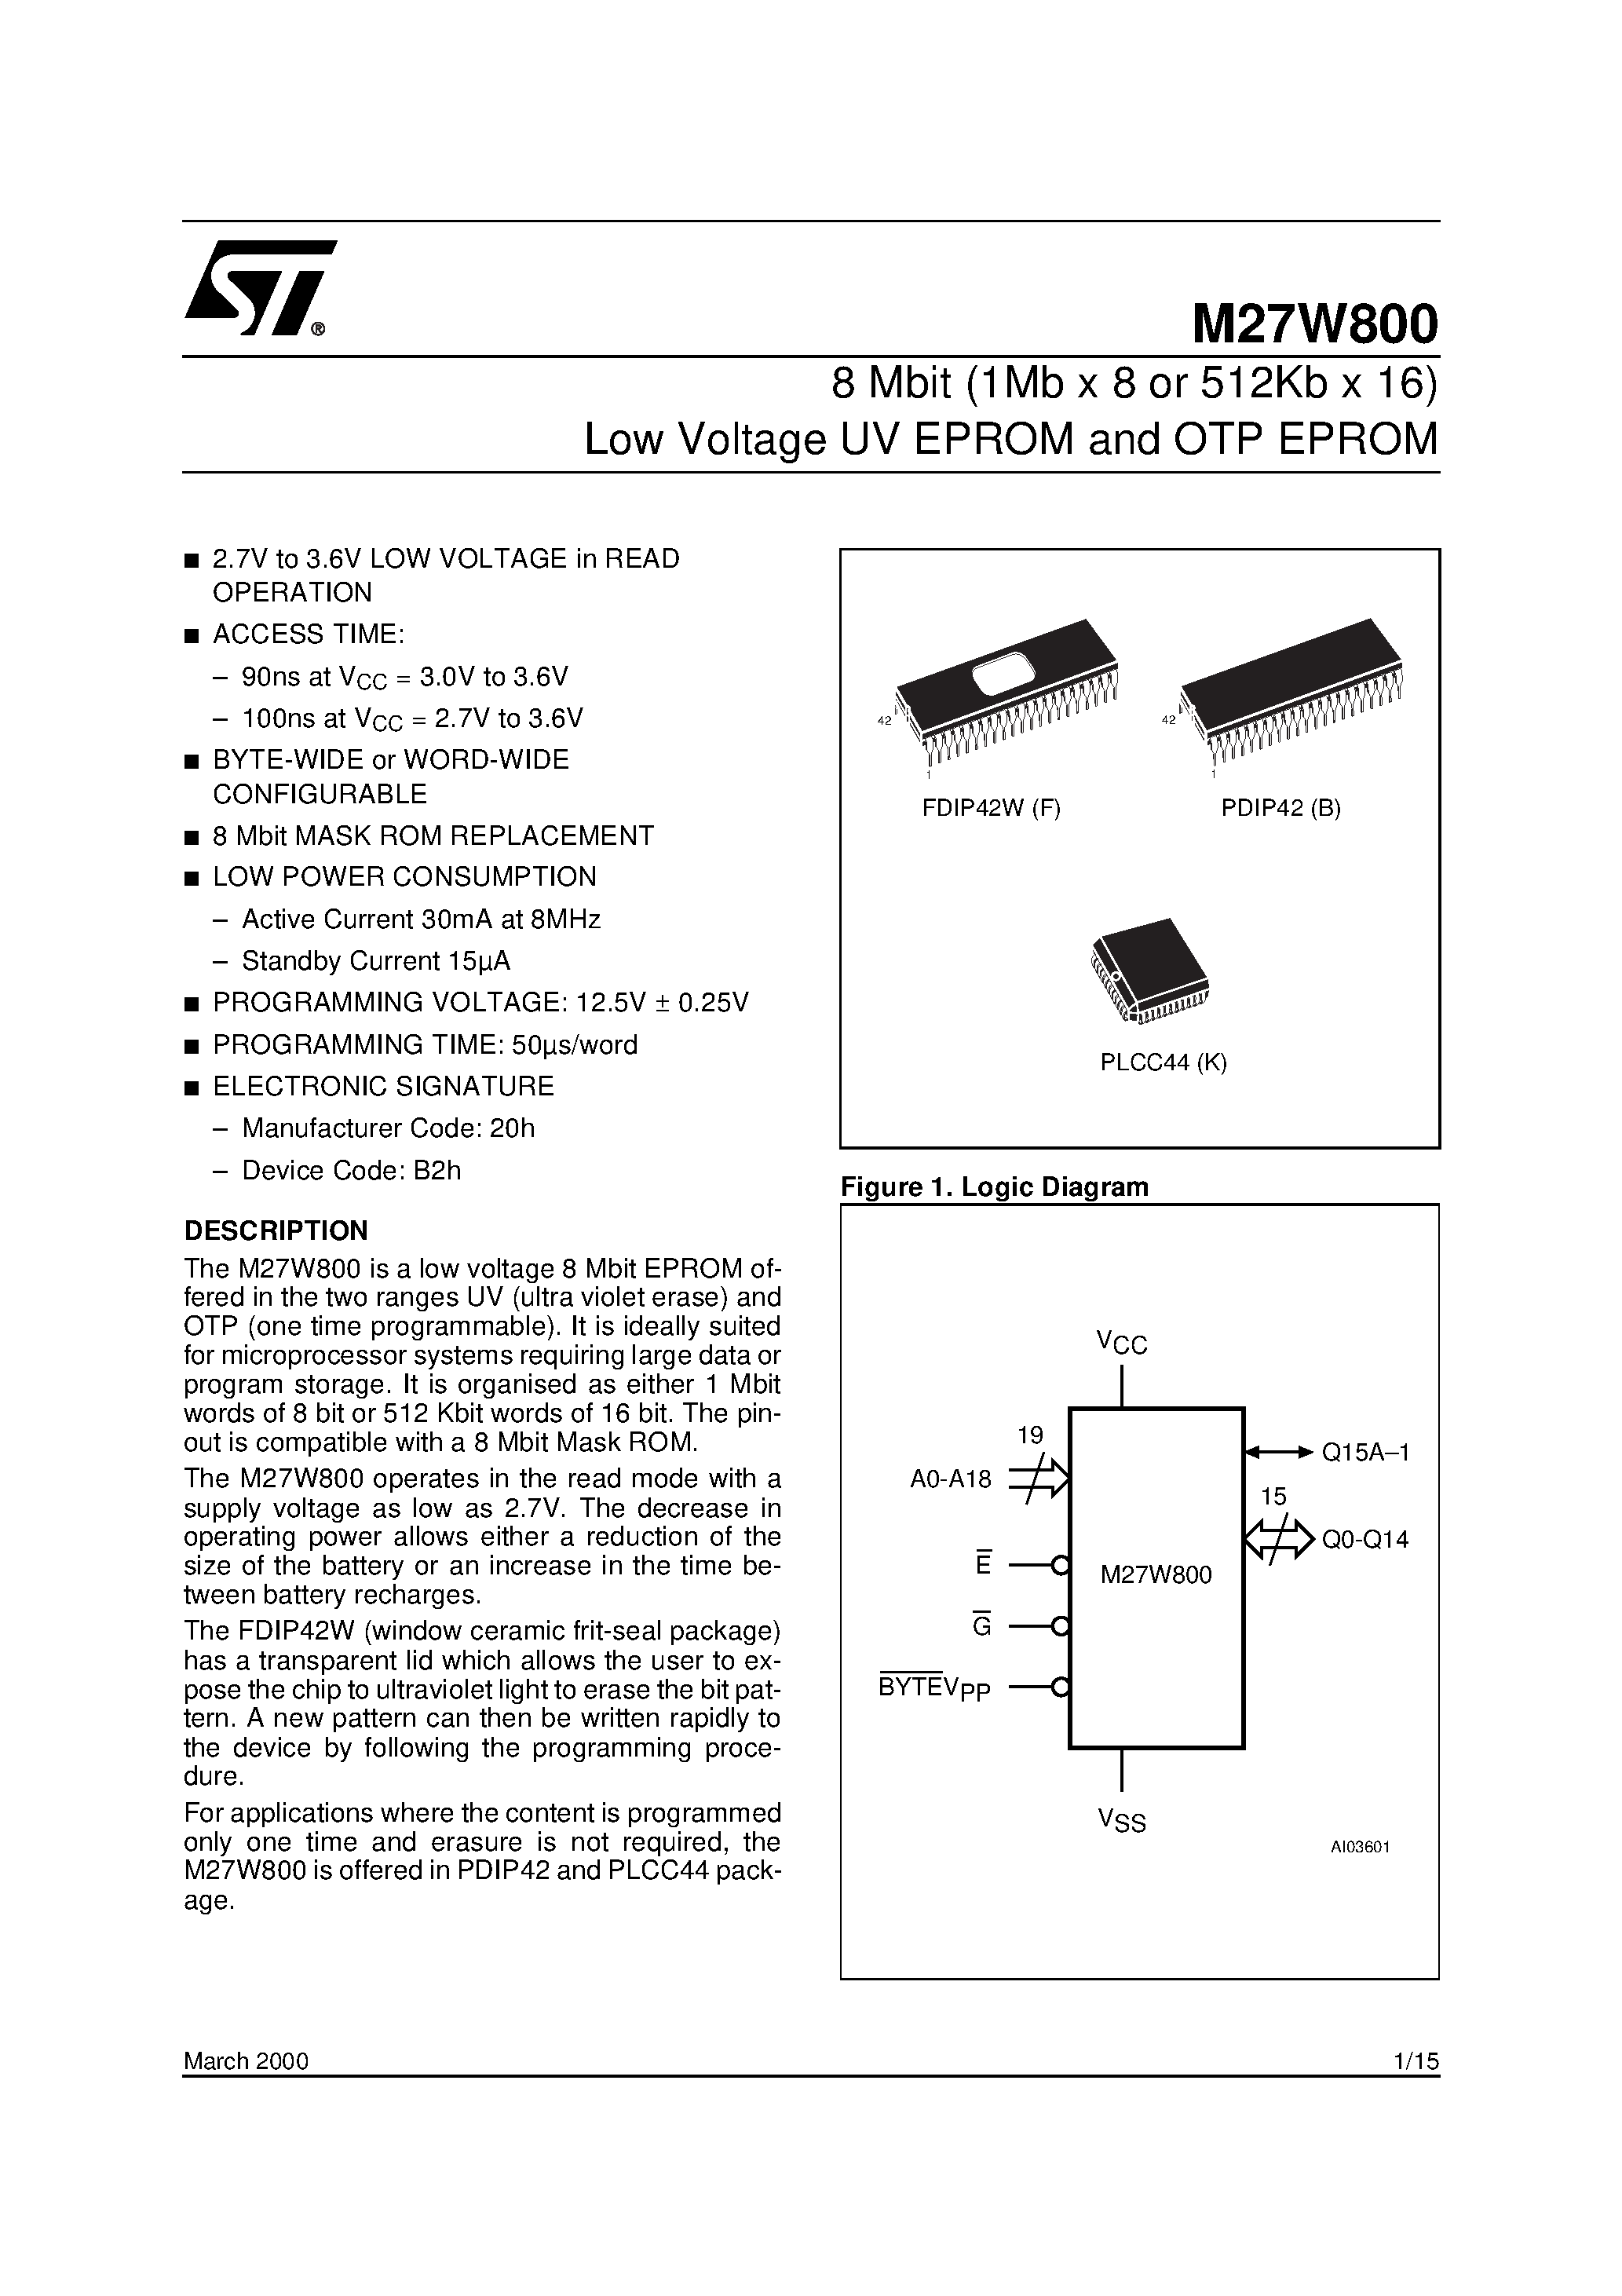 Datasheet M27W800-120F6TR - 8 Mbit 1Mb x 8 or 512Kb x 16 Low Voltage UV EPROM and OTP EPROM page 1